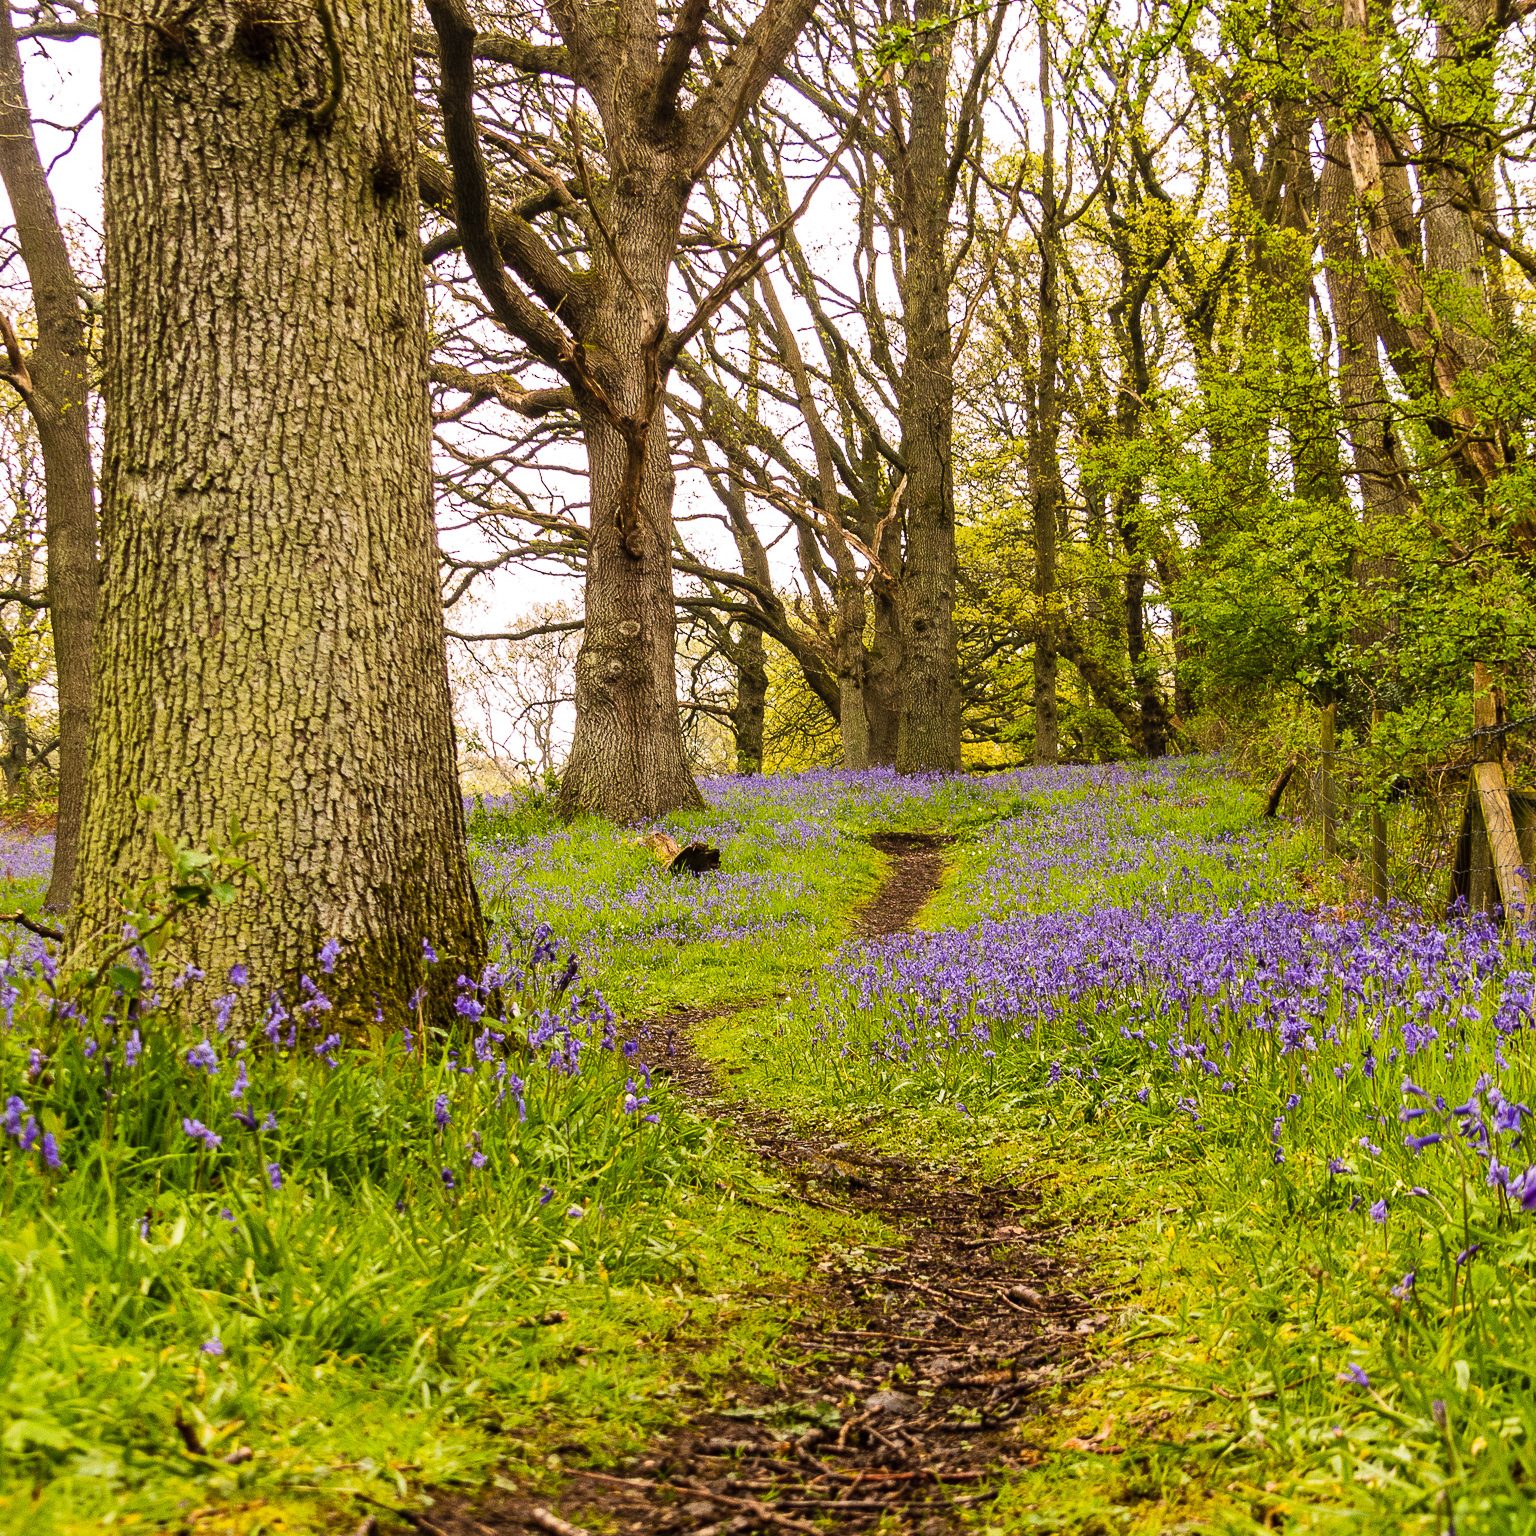 Bluebells in Bloom: A Gorgeous Photoshoot in the Forest